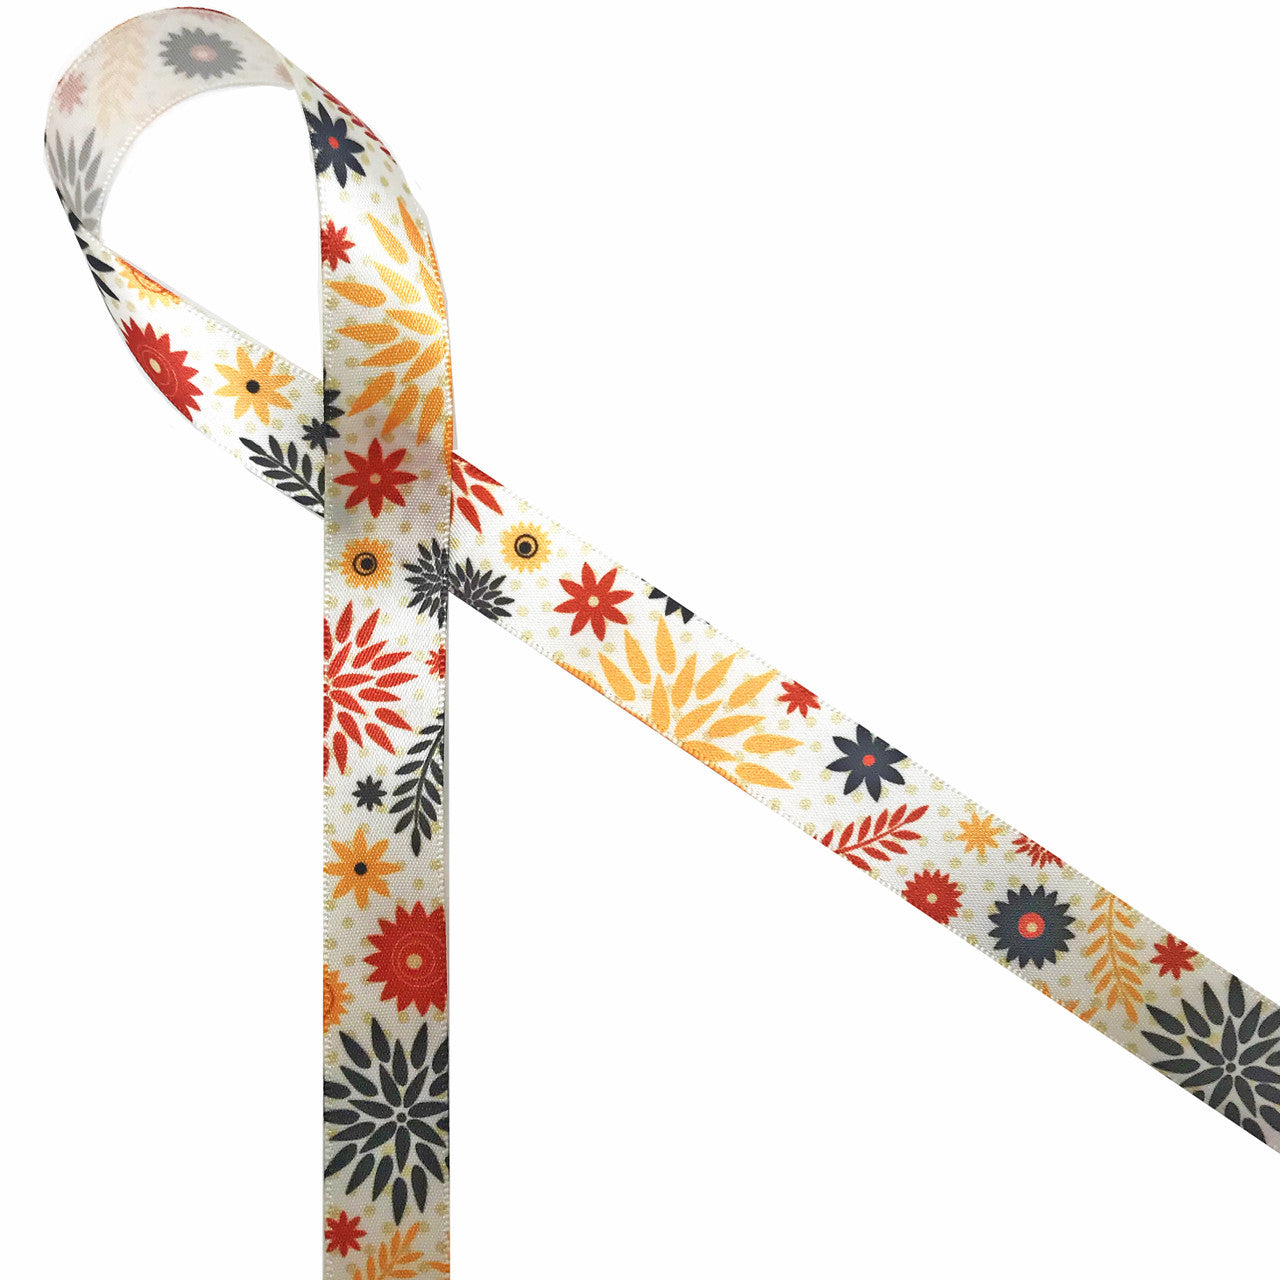 Retro floral design in gold, rust and brown with a tone on tone polka dot background printed on 5/8" Antique white single face satin ribbon. Offered in 10 and 90 yard spools.